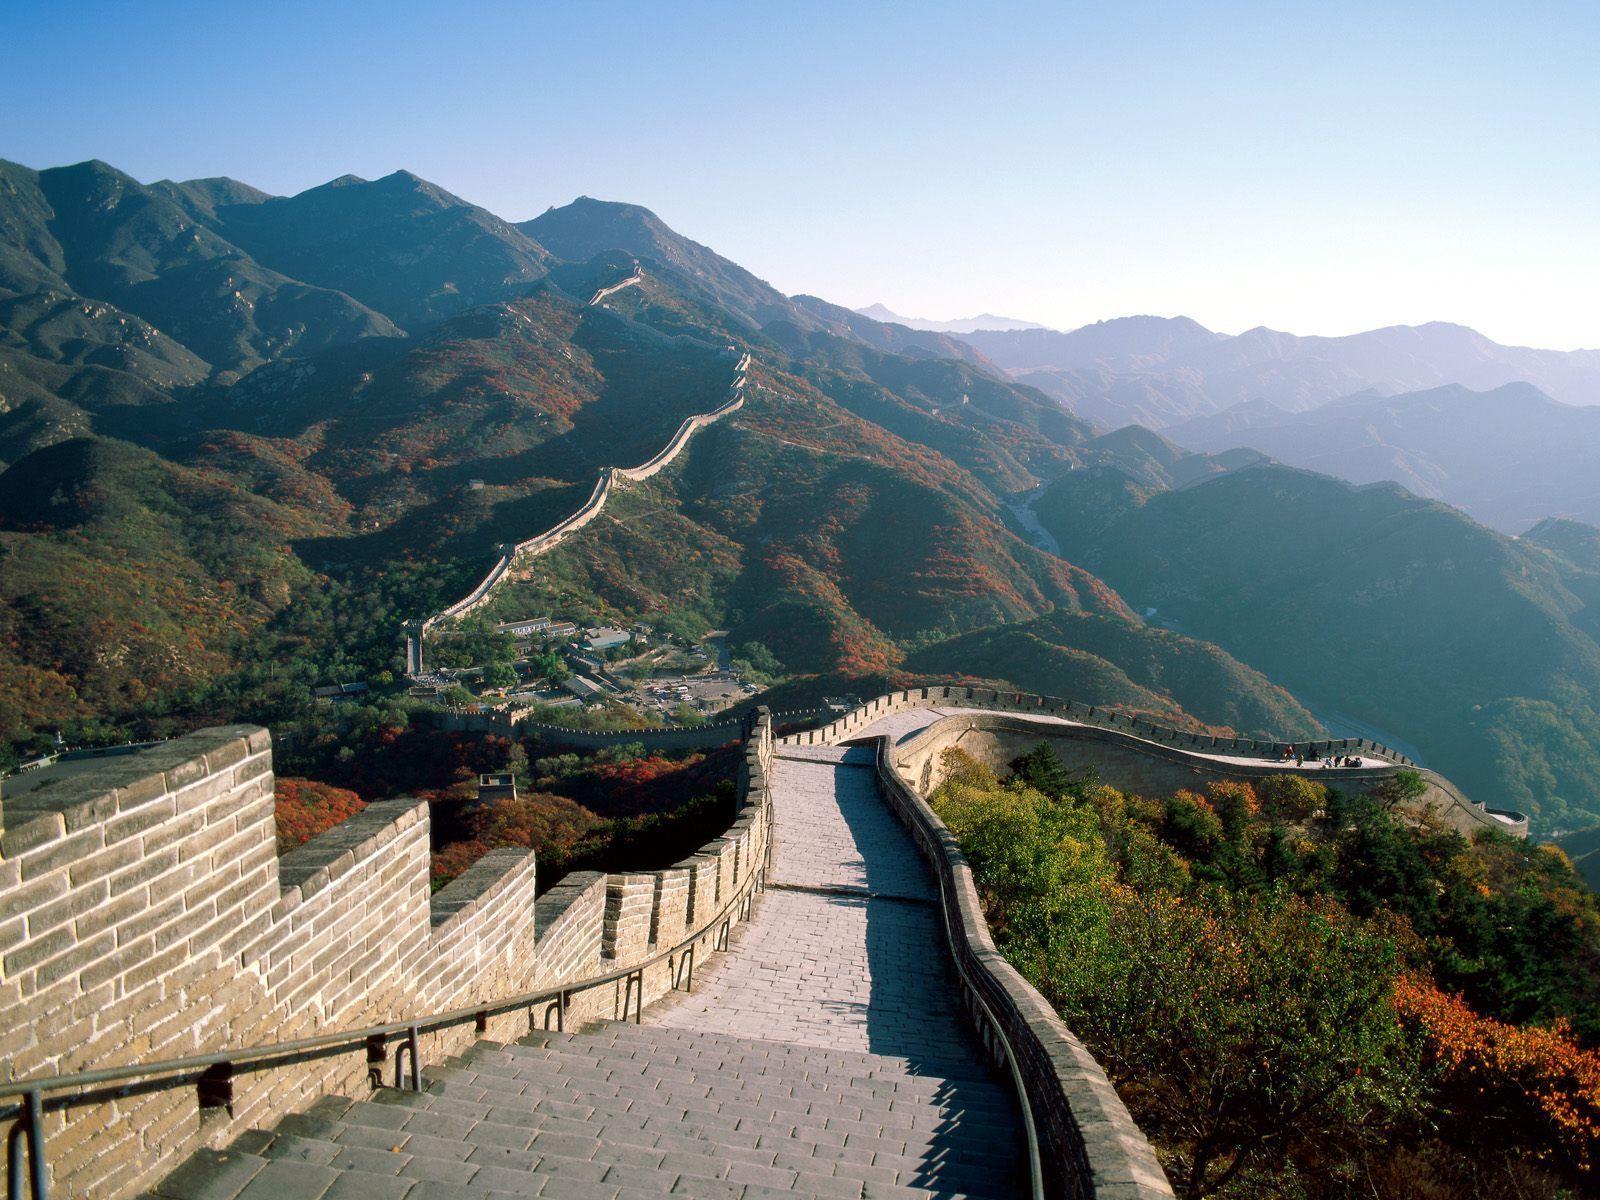 The Great Wall of China wallpaper picture download